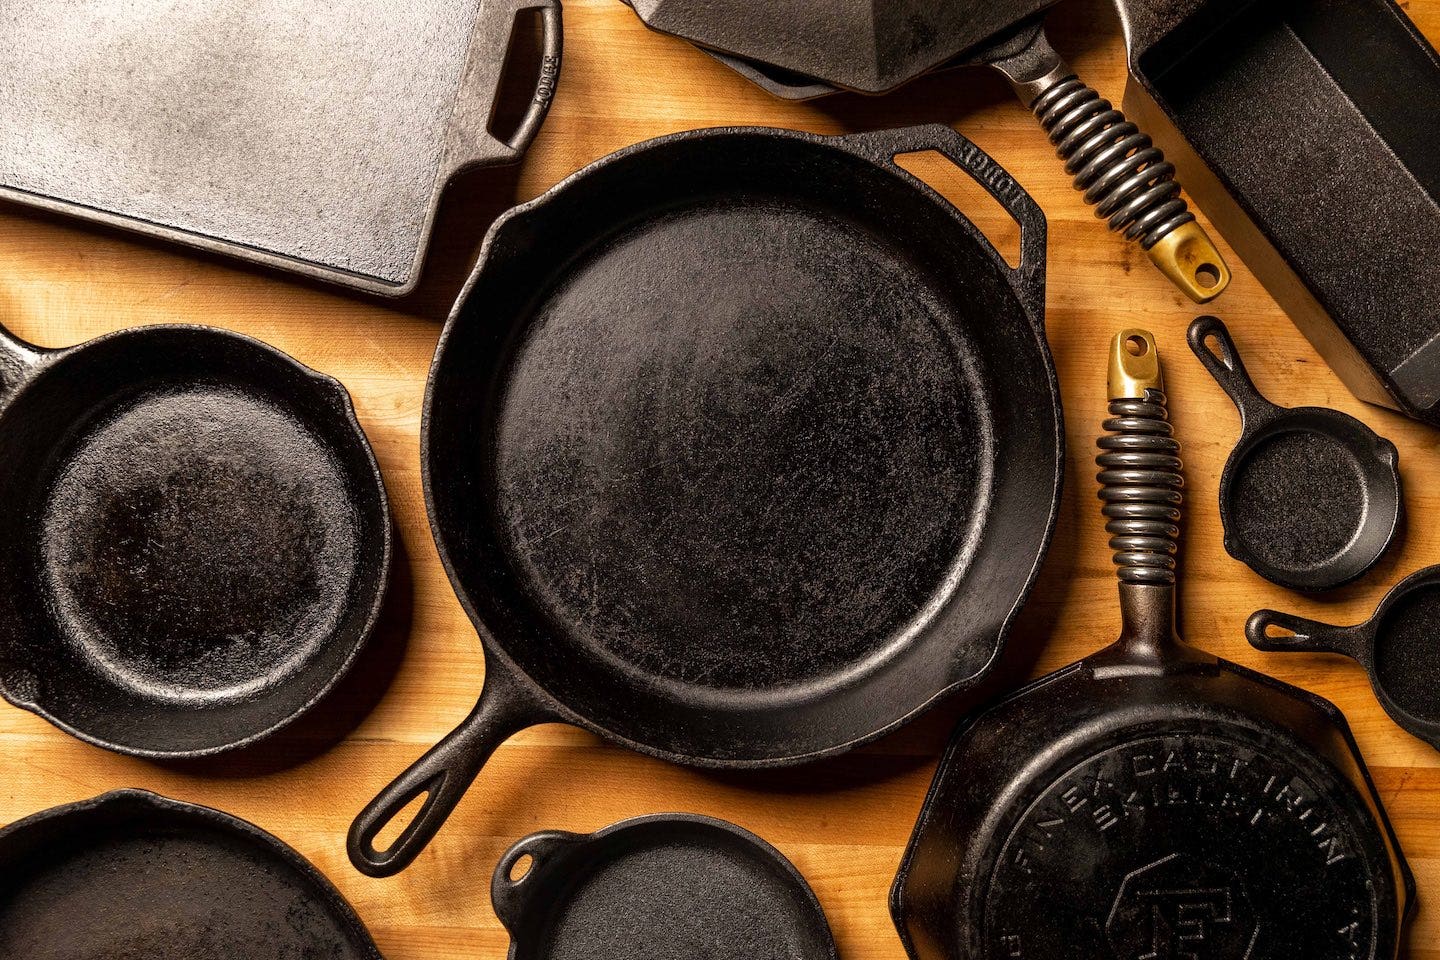 Take Care of Your Cast Iron Cookware Like a Pro